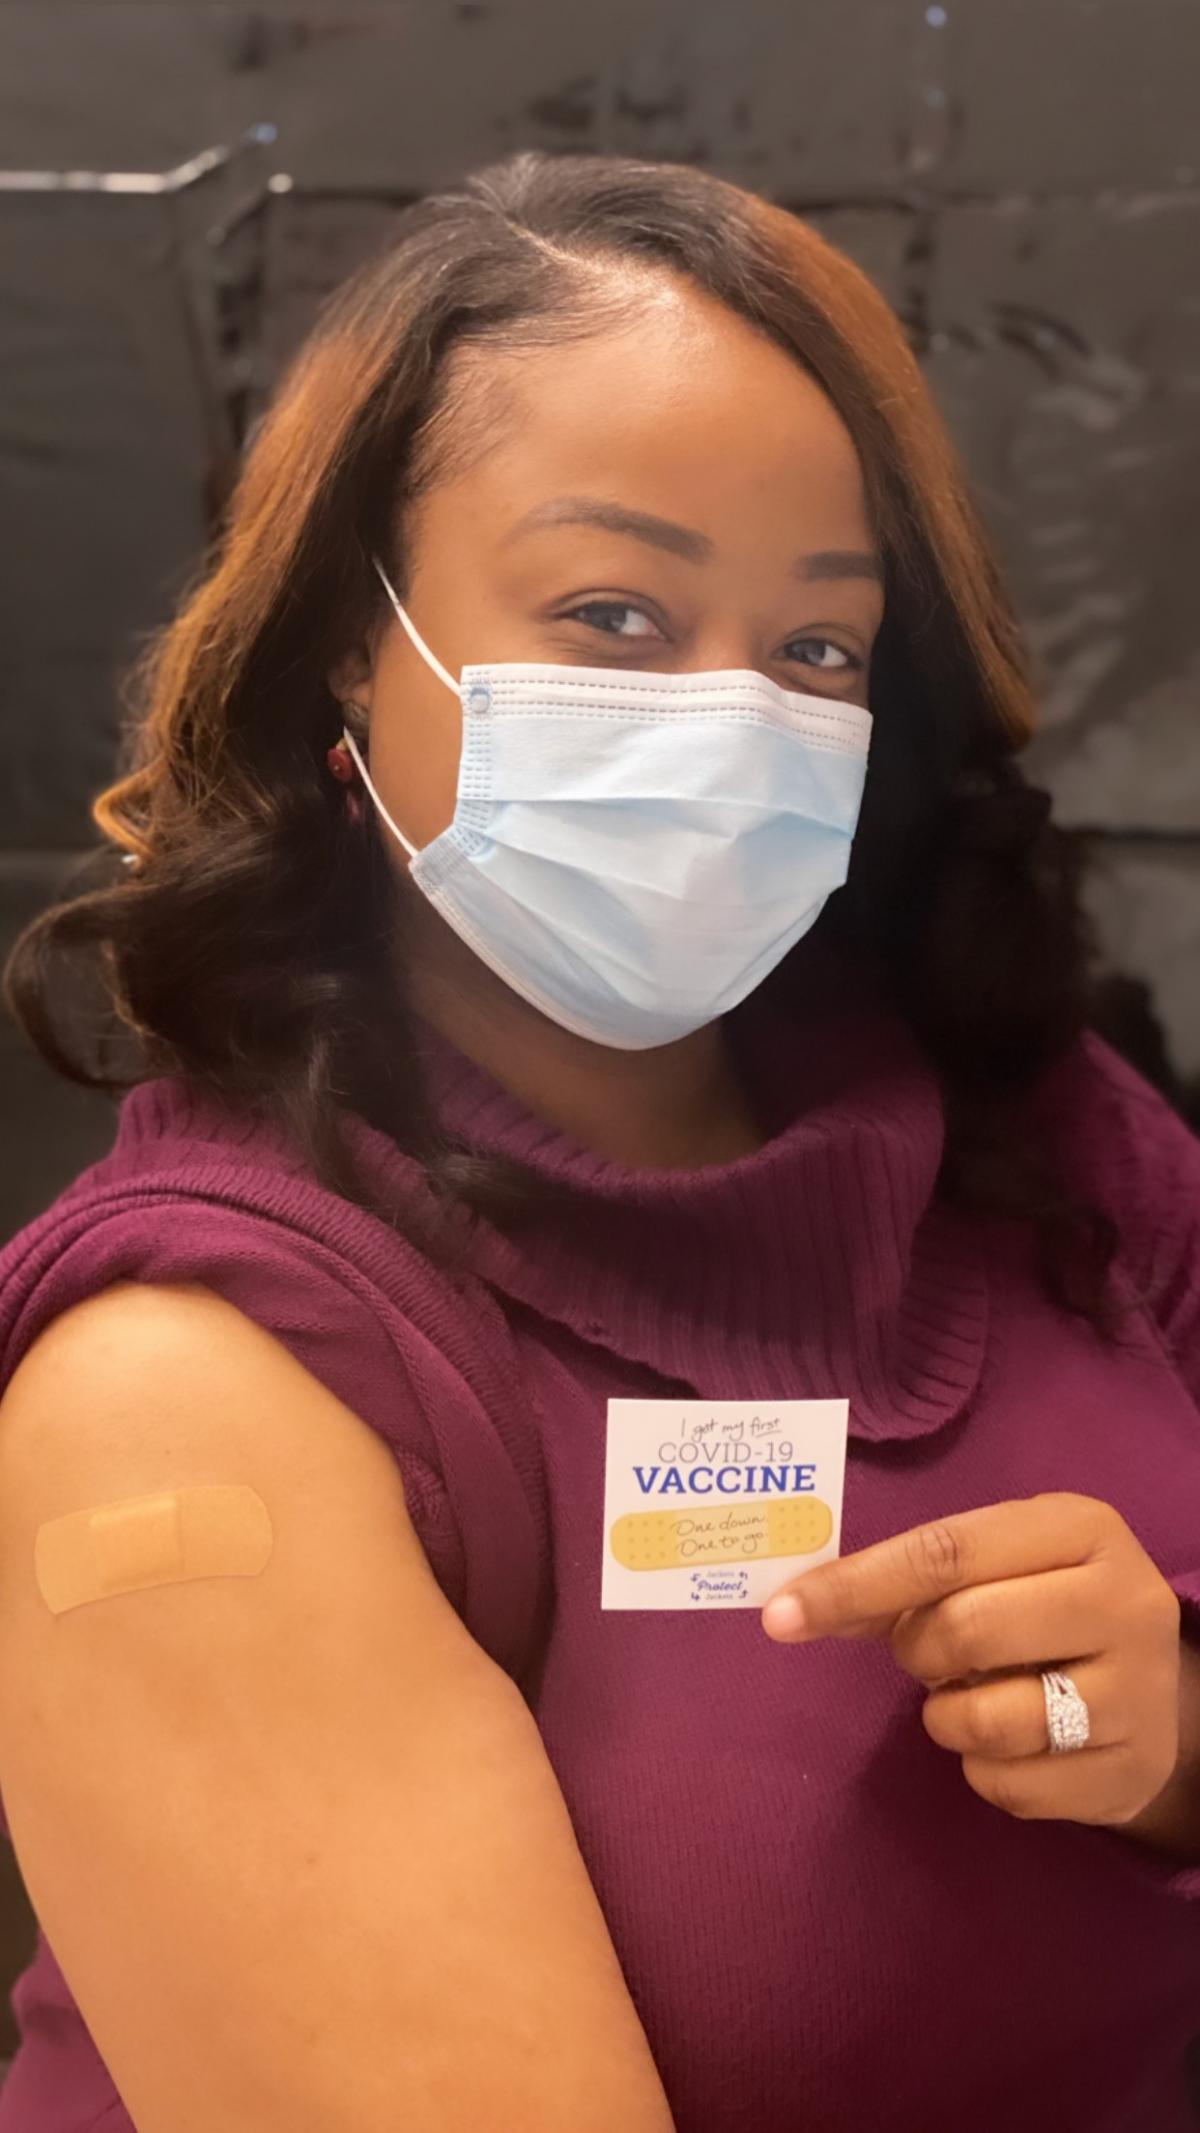 Quinae holding a vaccination sticker, photo